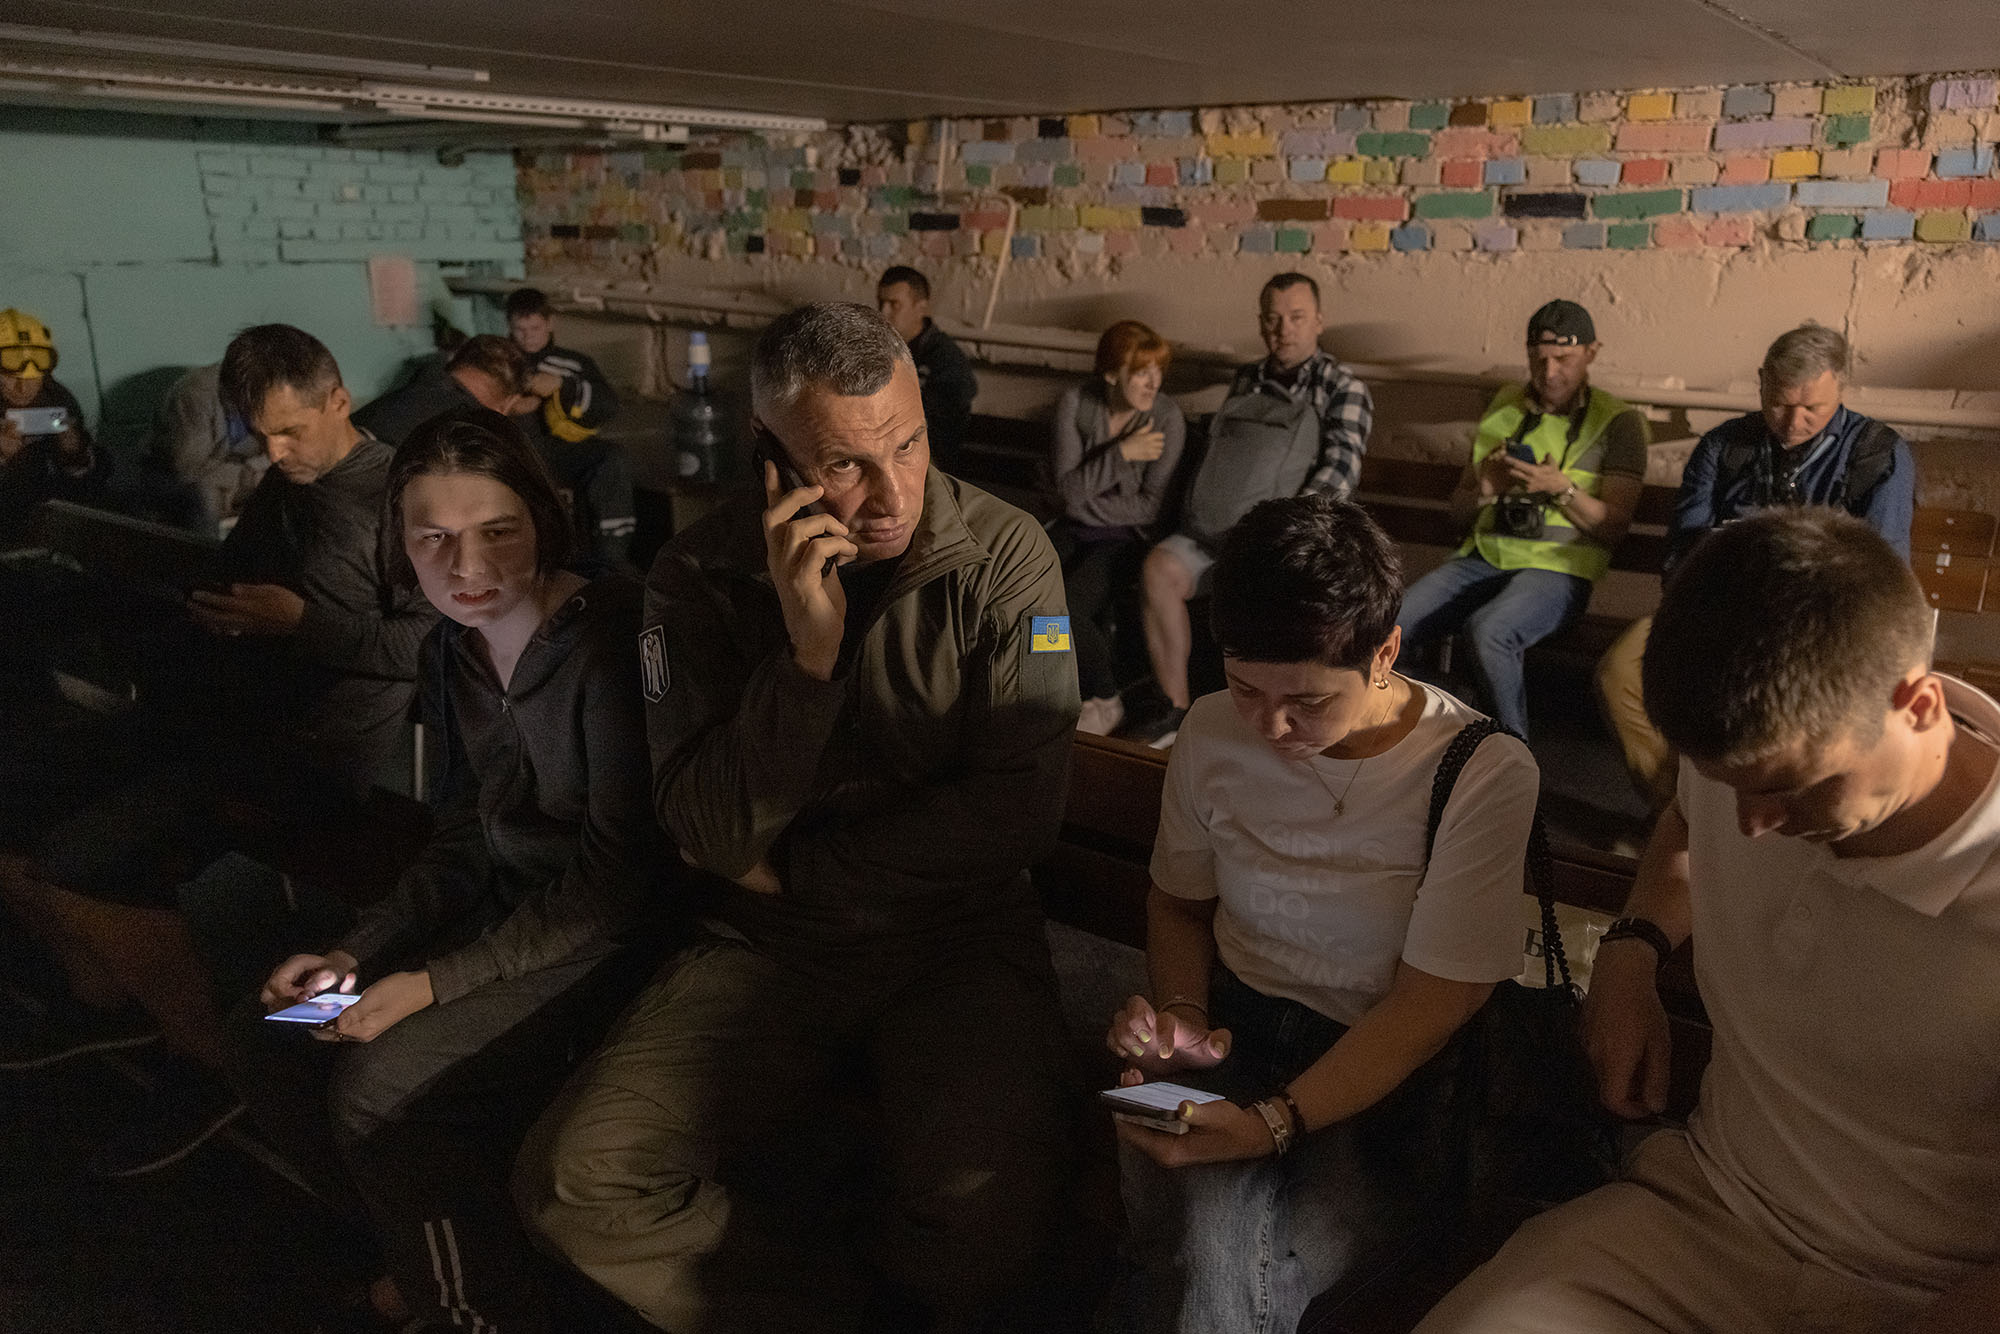 Mayor of Kyiv Vitali Klitschko, center, sits with others in a school's shelter during an air raid alert on June 1, in Kyiv, Ukraine.